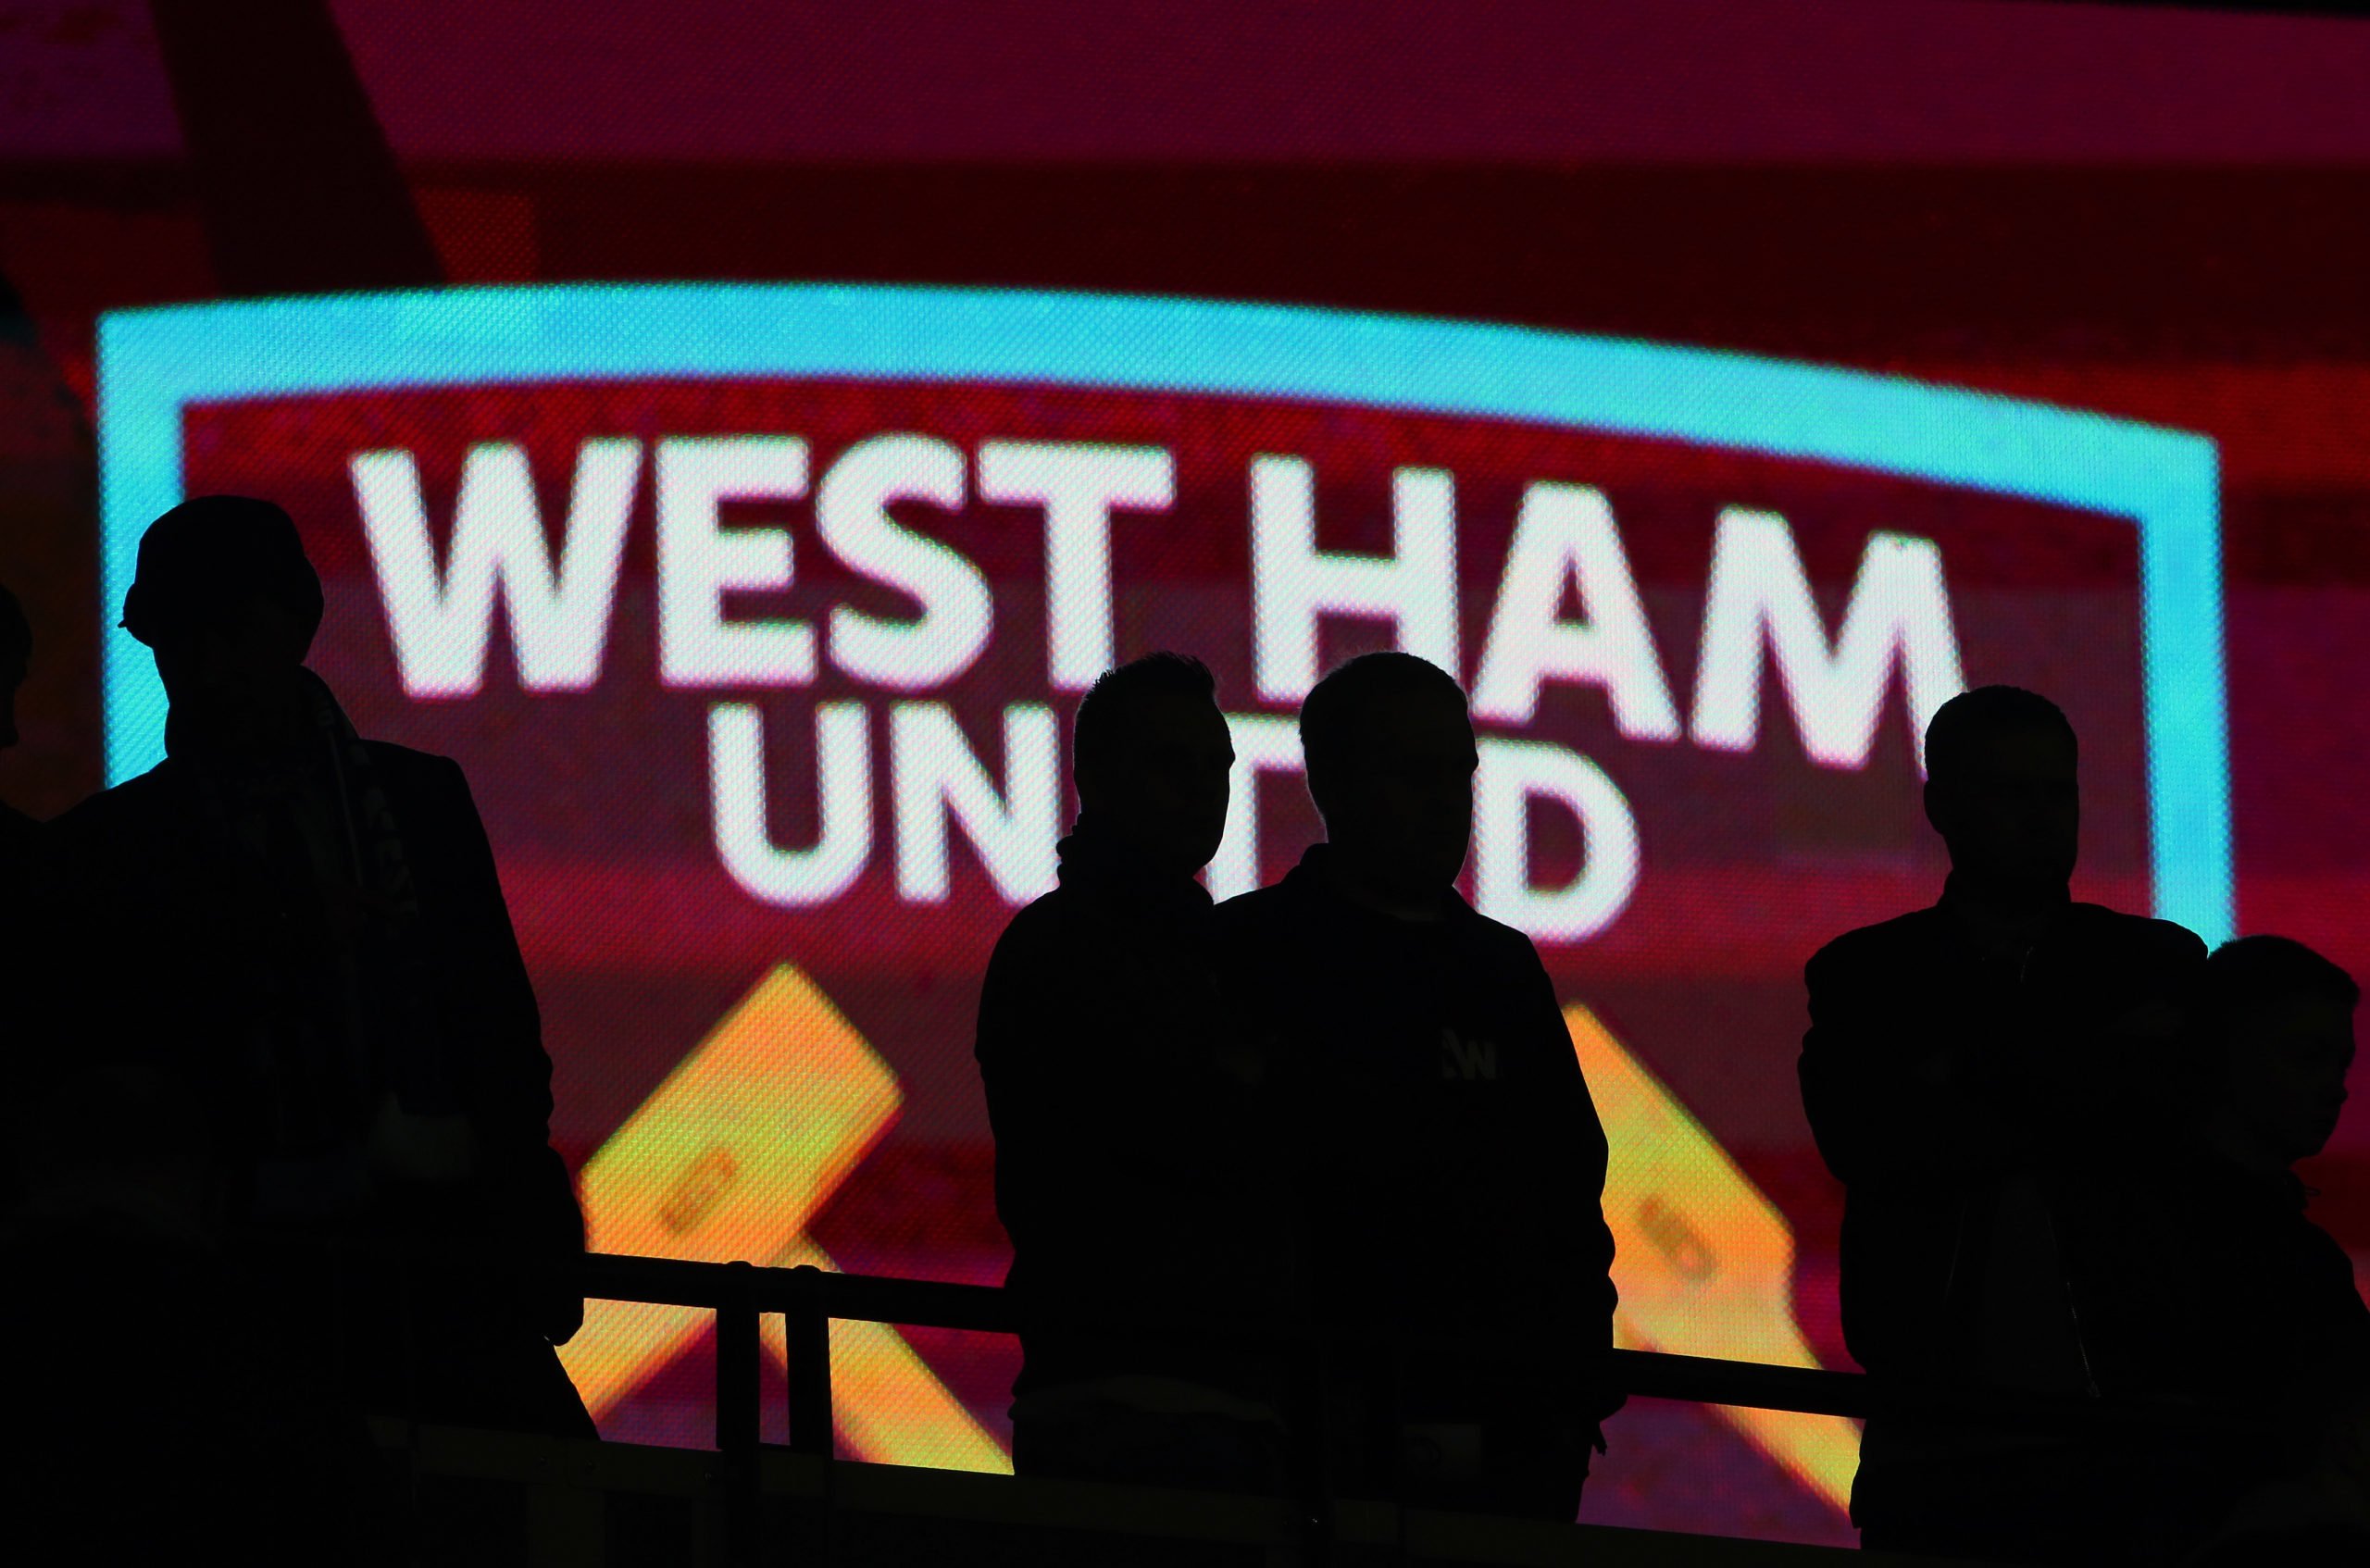 Premier League club calls meeting to discuss bid insider claims is from West Ham